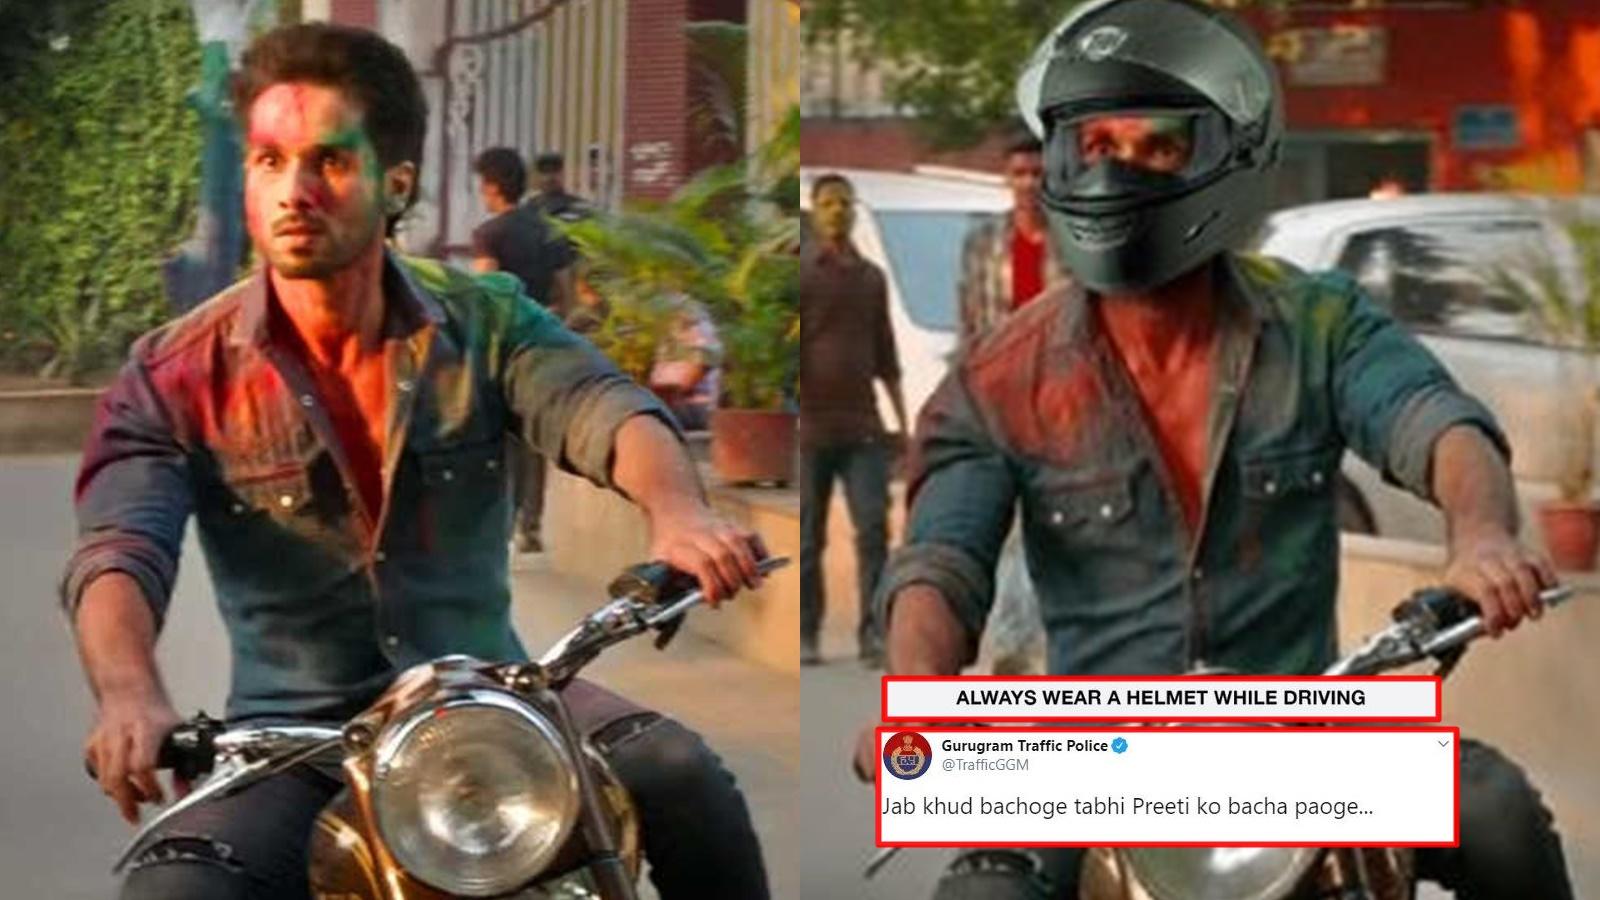 Kabir Singh Gurugram Traffic Police Share Witty Meme On Shahid Kapoor Starrer To Spread Road Safety Awareness Leave Netizens In Splits Hindi Movie News Bollywood Times Of India Kabir singh best scene, kabir singh bullet scene, kabir singh romantic scene check out all of the deleted scenes from the blockbuster movie of 2019 kabir singh. kabir singh gurugram traffic police share witty meme on shahid kapoor starrer to spread road safety awareness leave netizens in splits